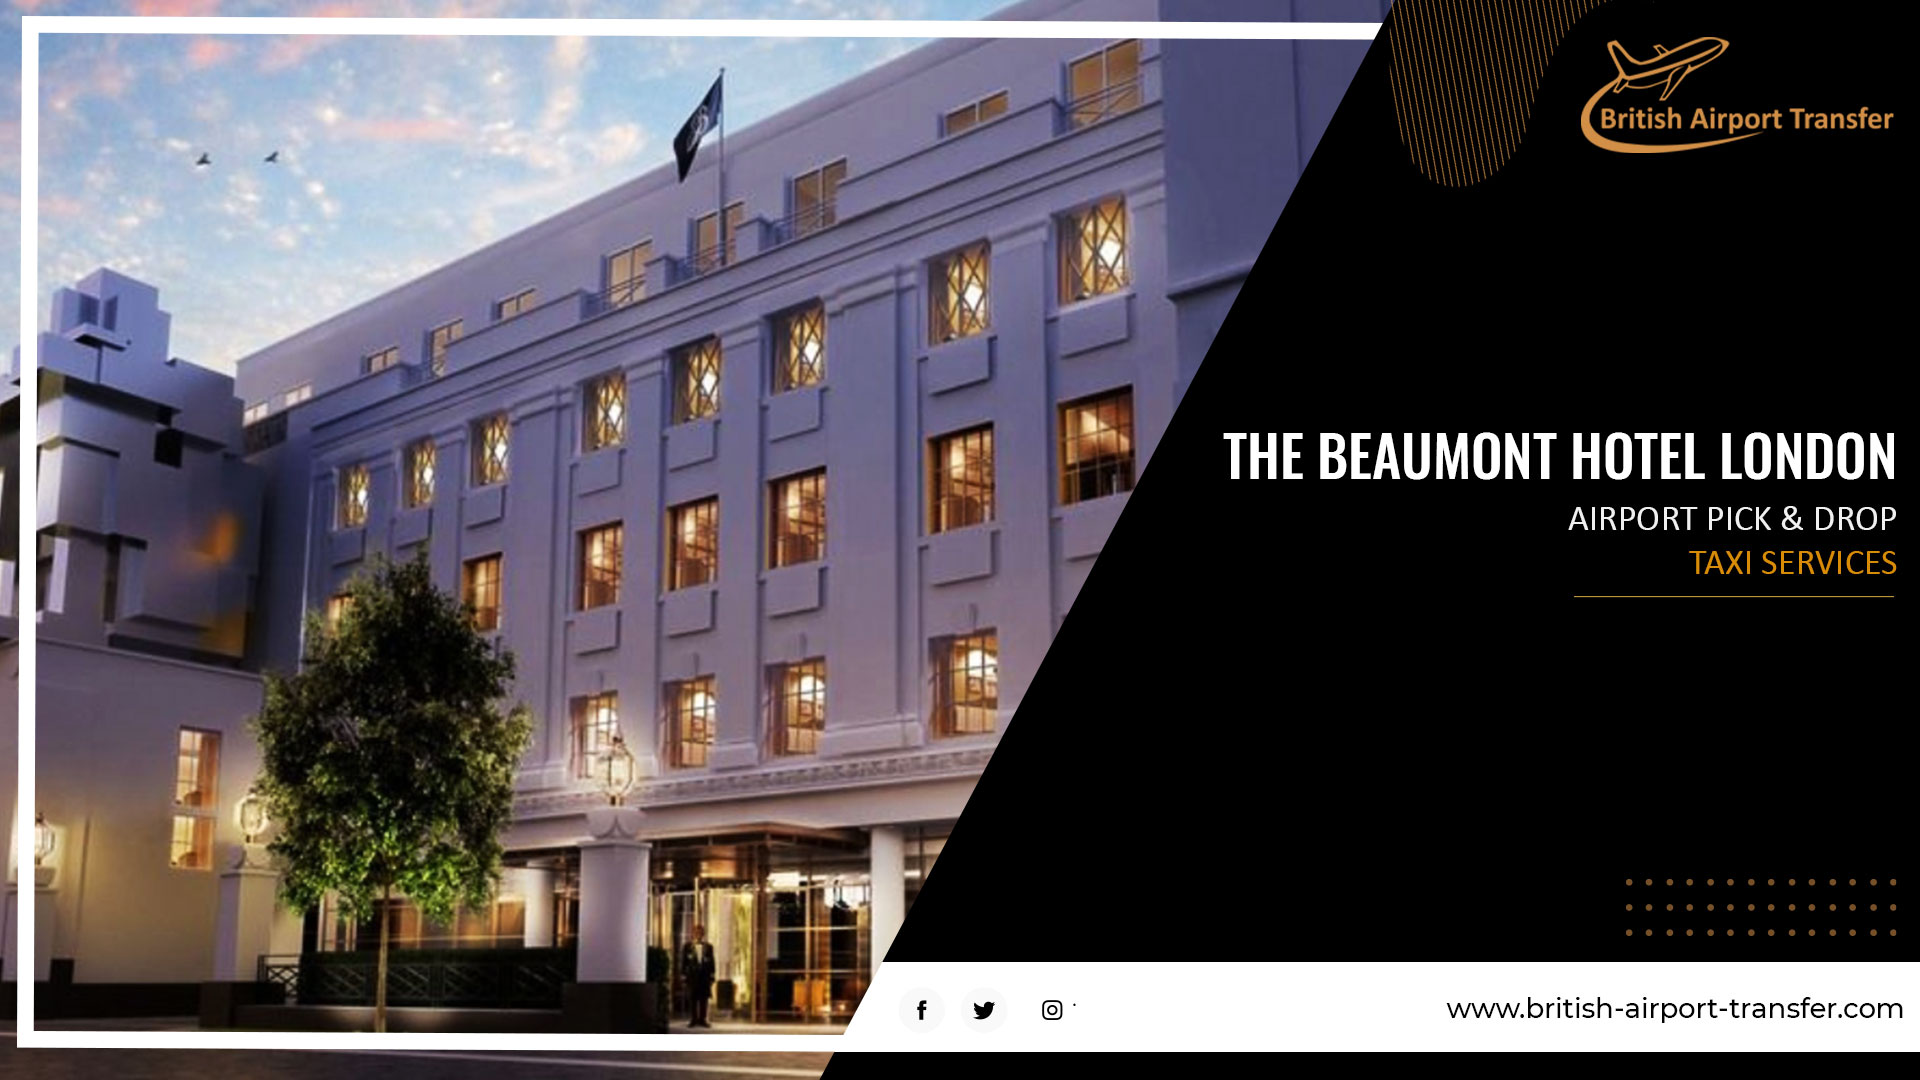 Taxi Cab – The Beaumont Hotel London / W1K 6TF